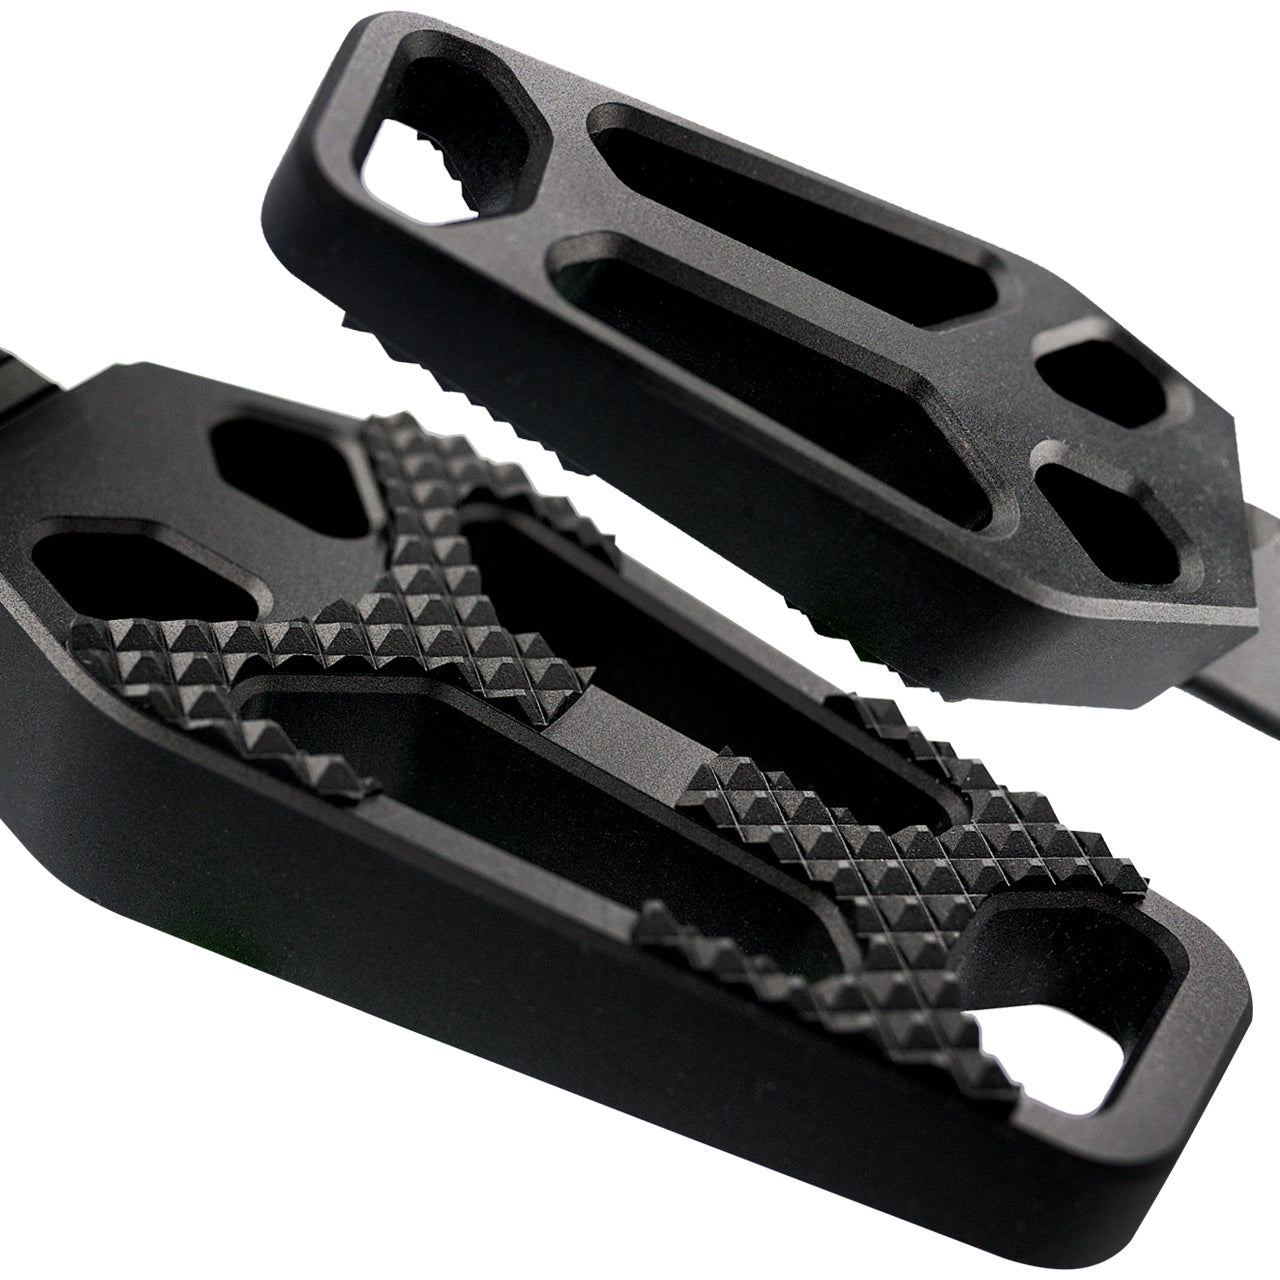 Crook Series Driver Foot Pegs for Harley Davidson M8 Softail models - Tommy&Sons